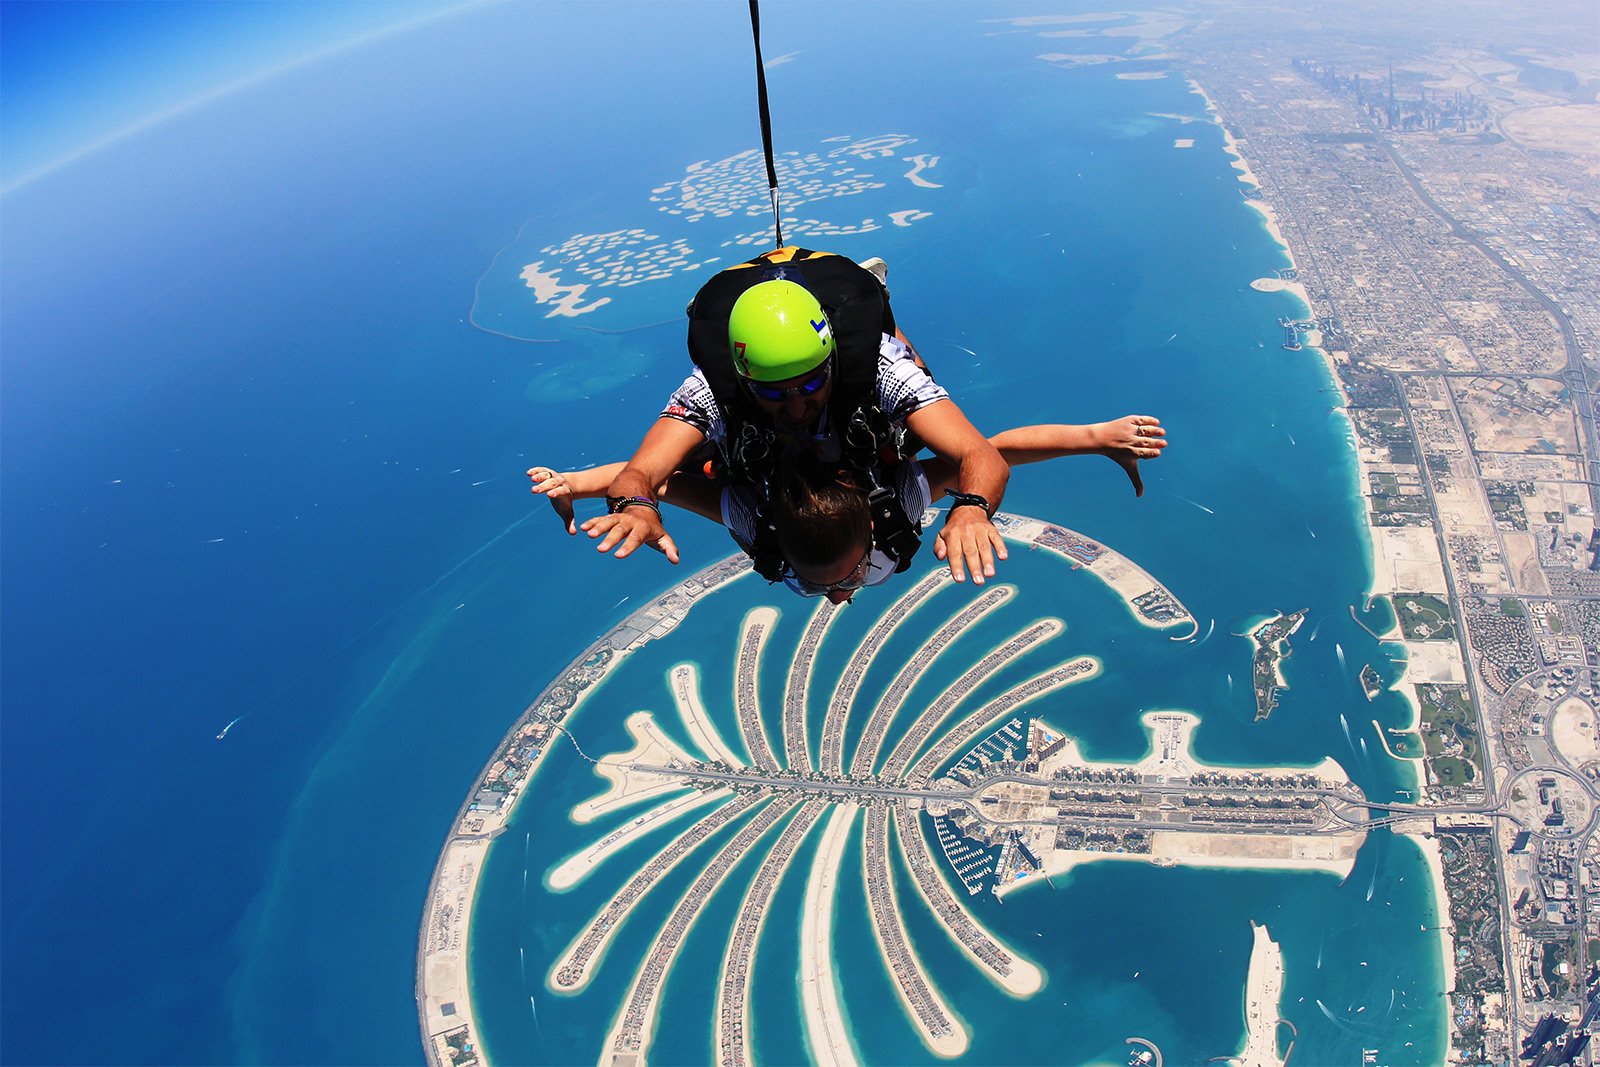 How to take a skydive in Dubai